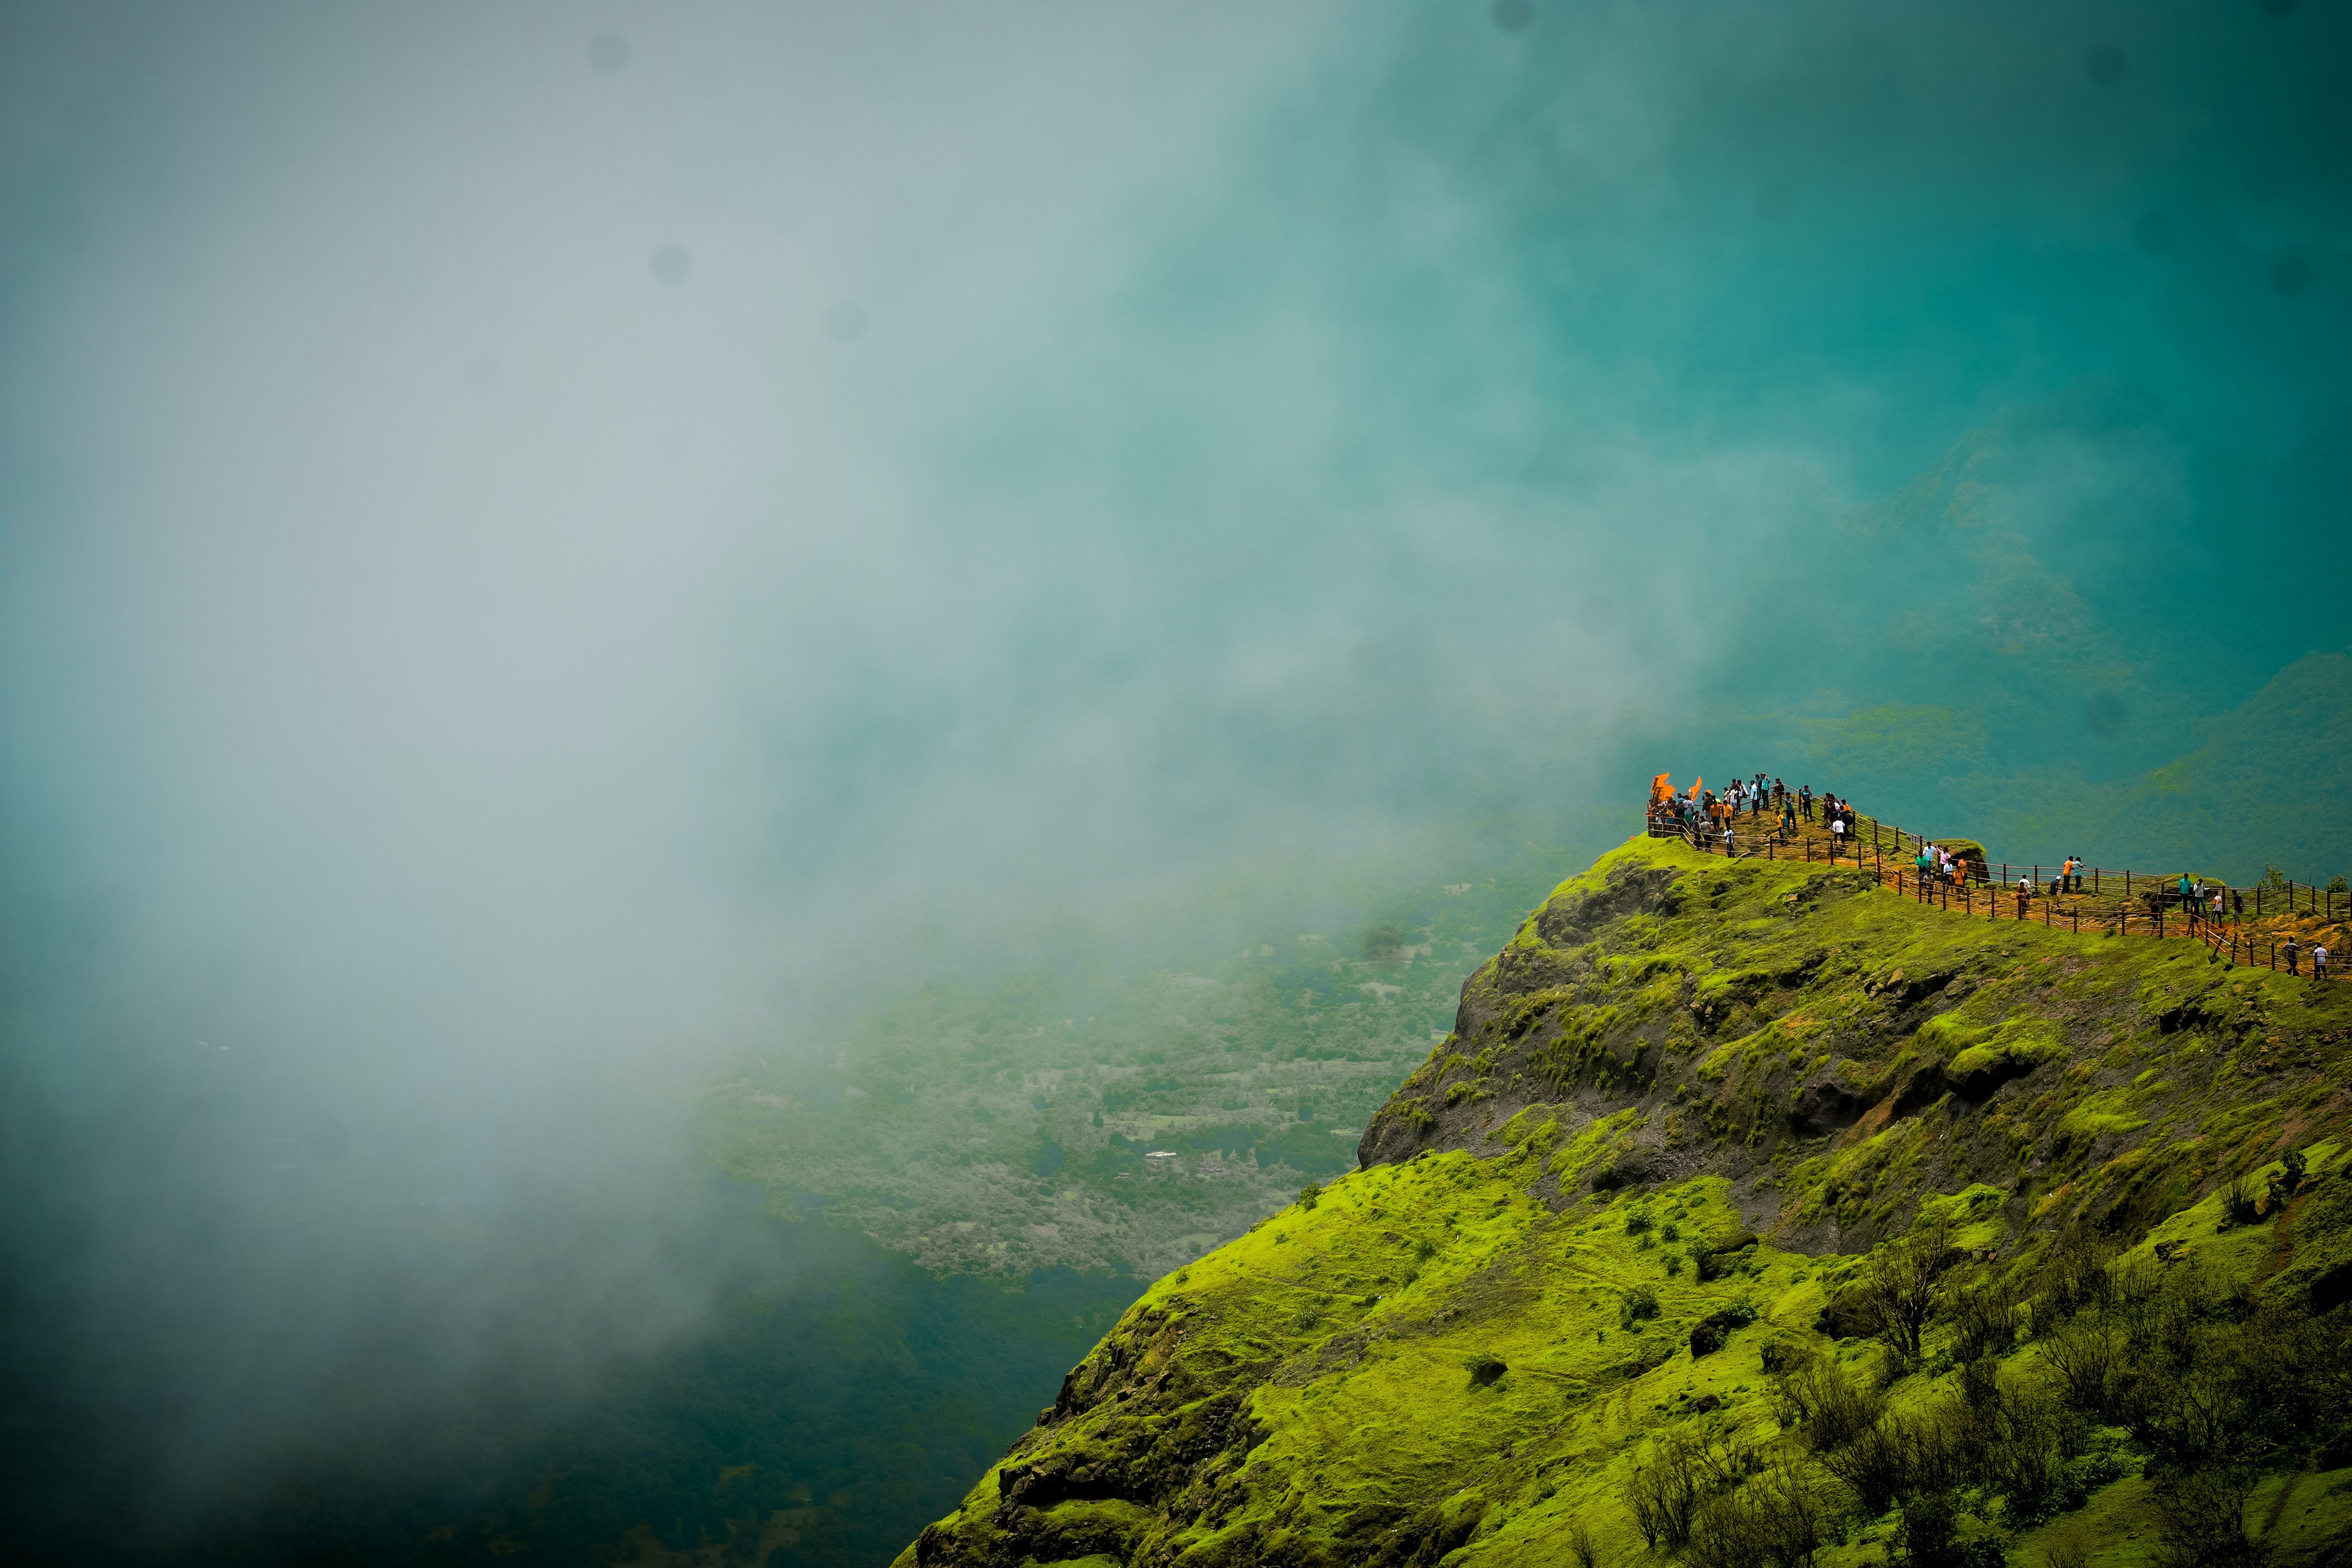 Raigad Fort Picture. Download Free Image